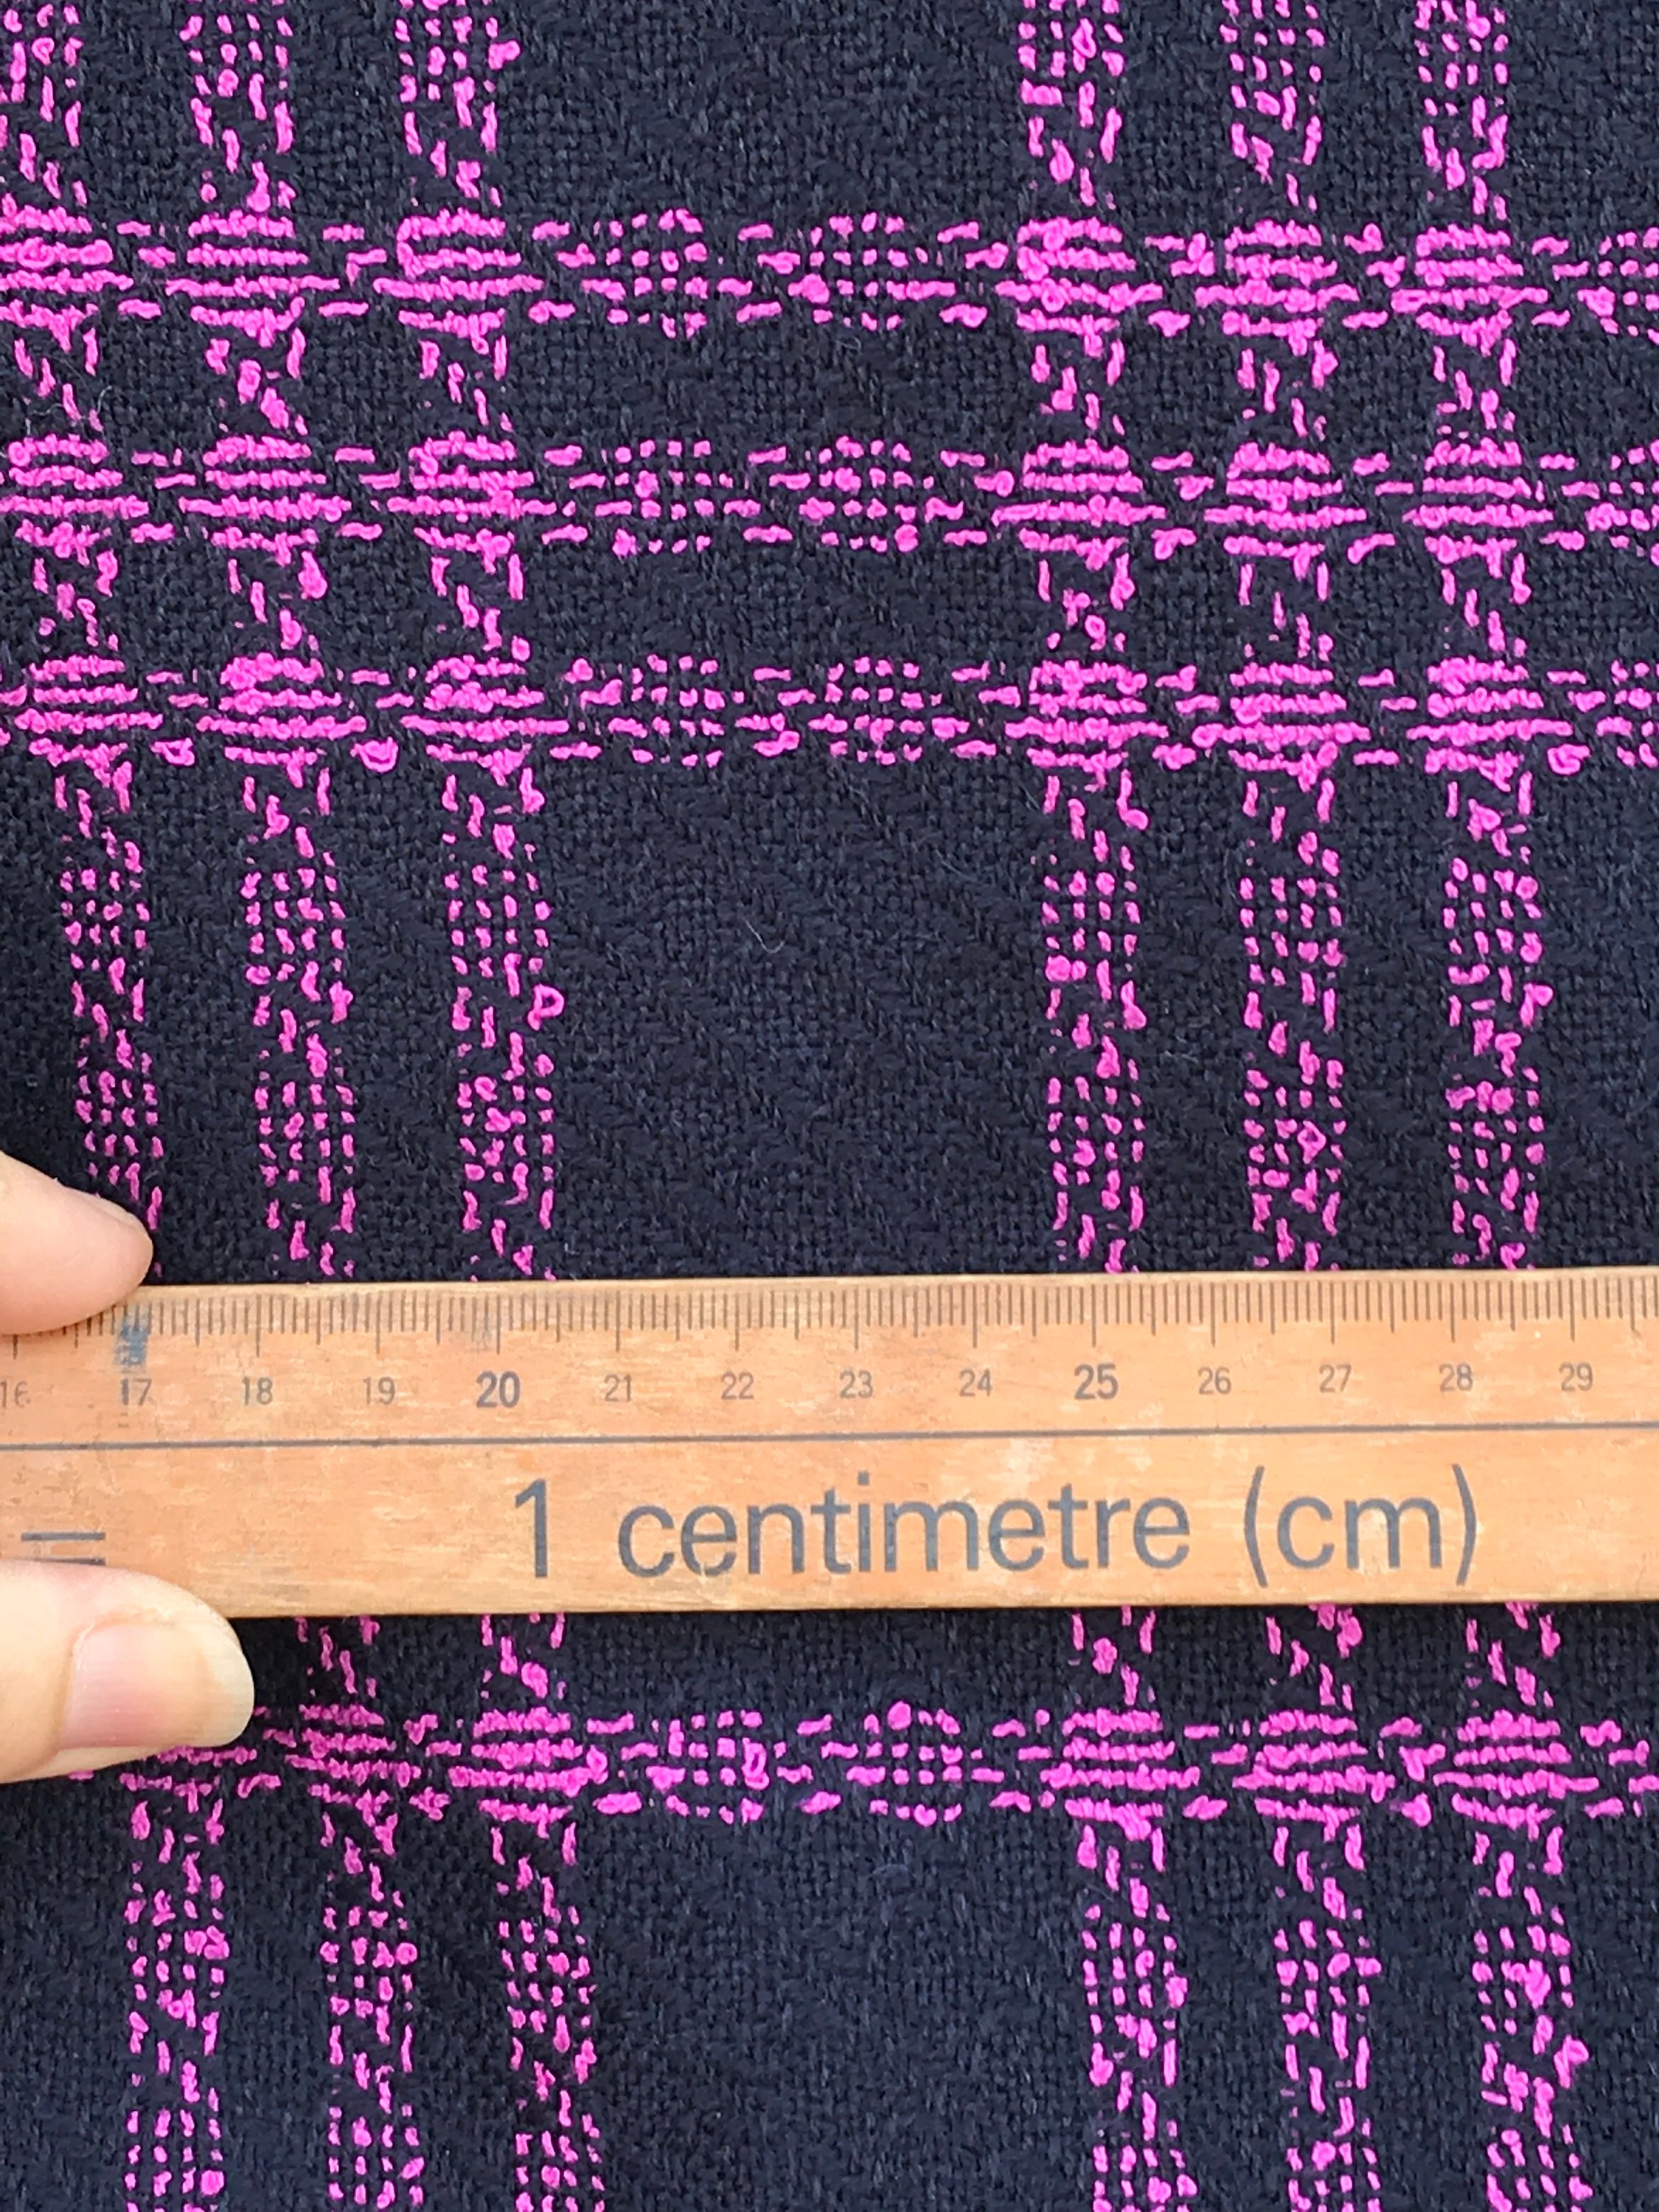 large check wool fabric, Tartan, Prince of Wales, pink on blue, Dormeuil, pure wool, suiting coating pure wool